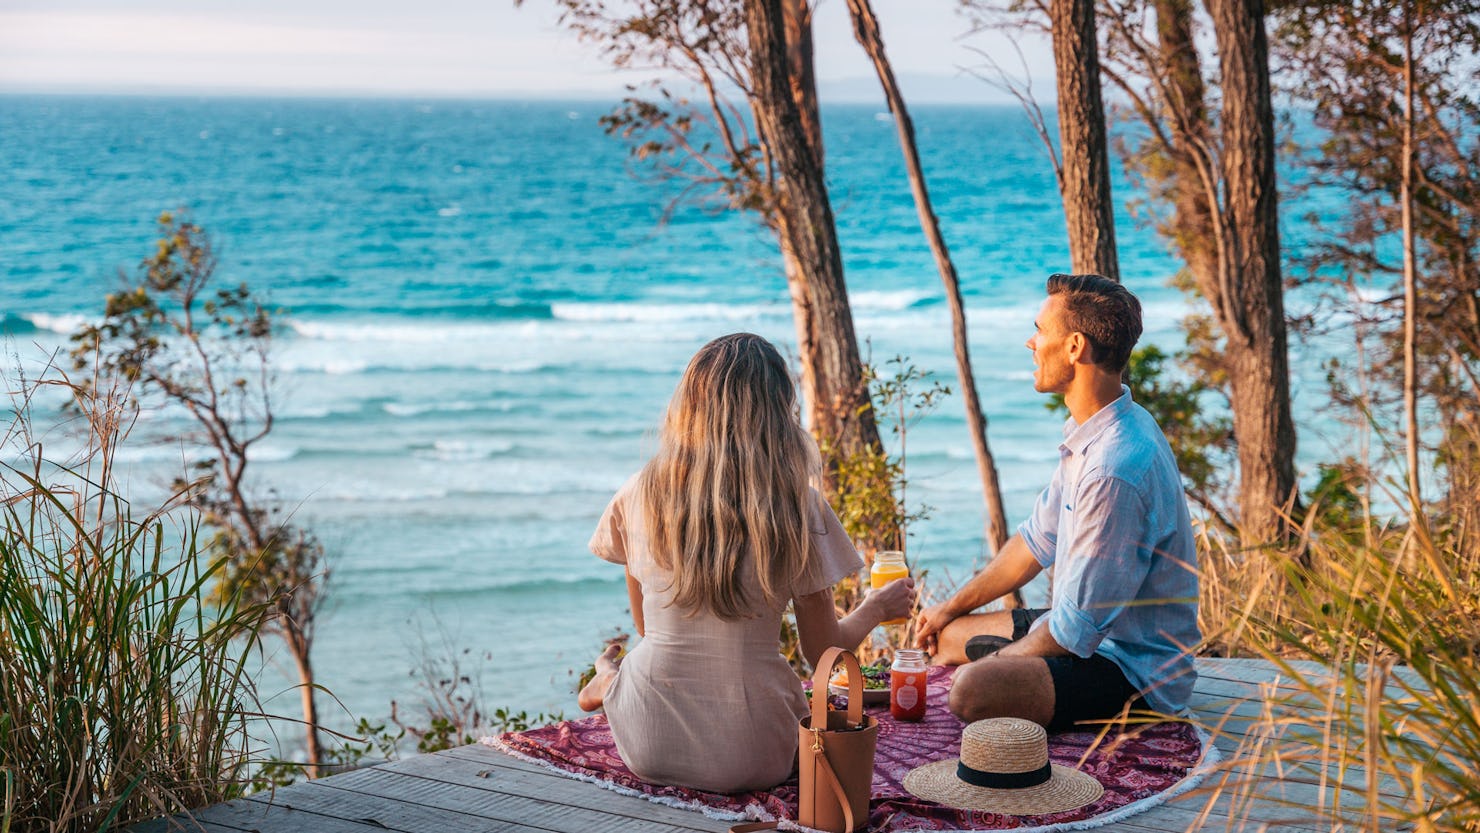 Where to spend Valentine’s Day on the Sunshine Coast